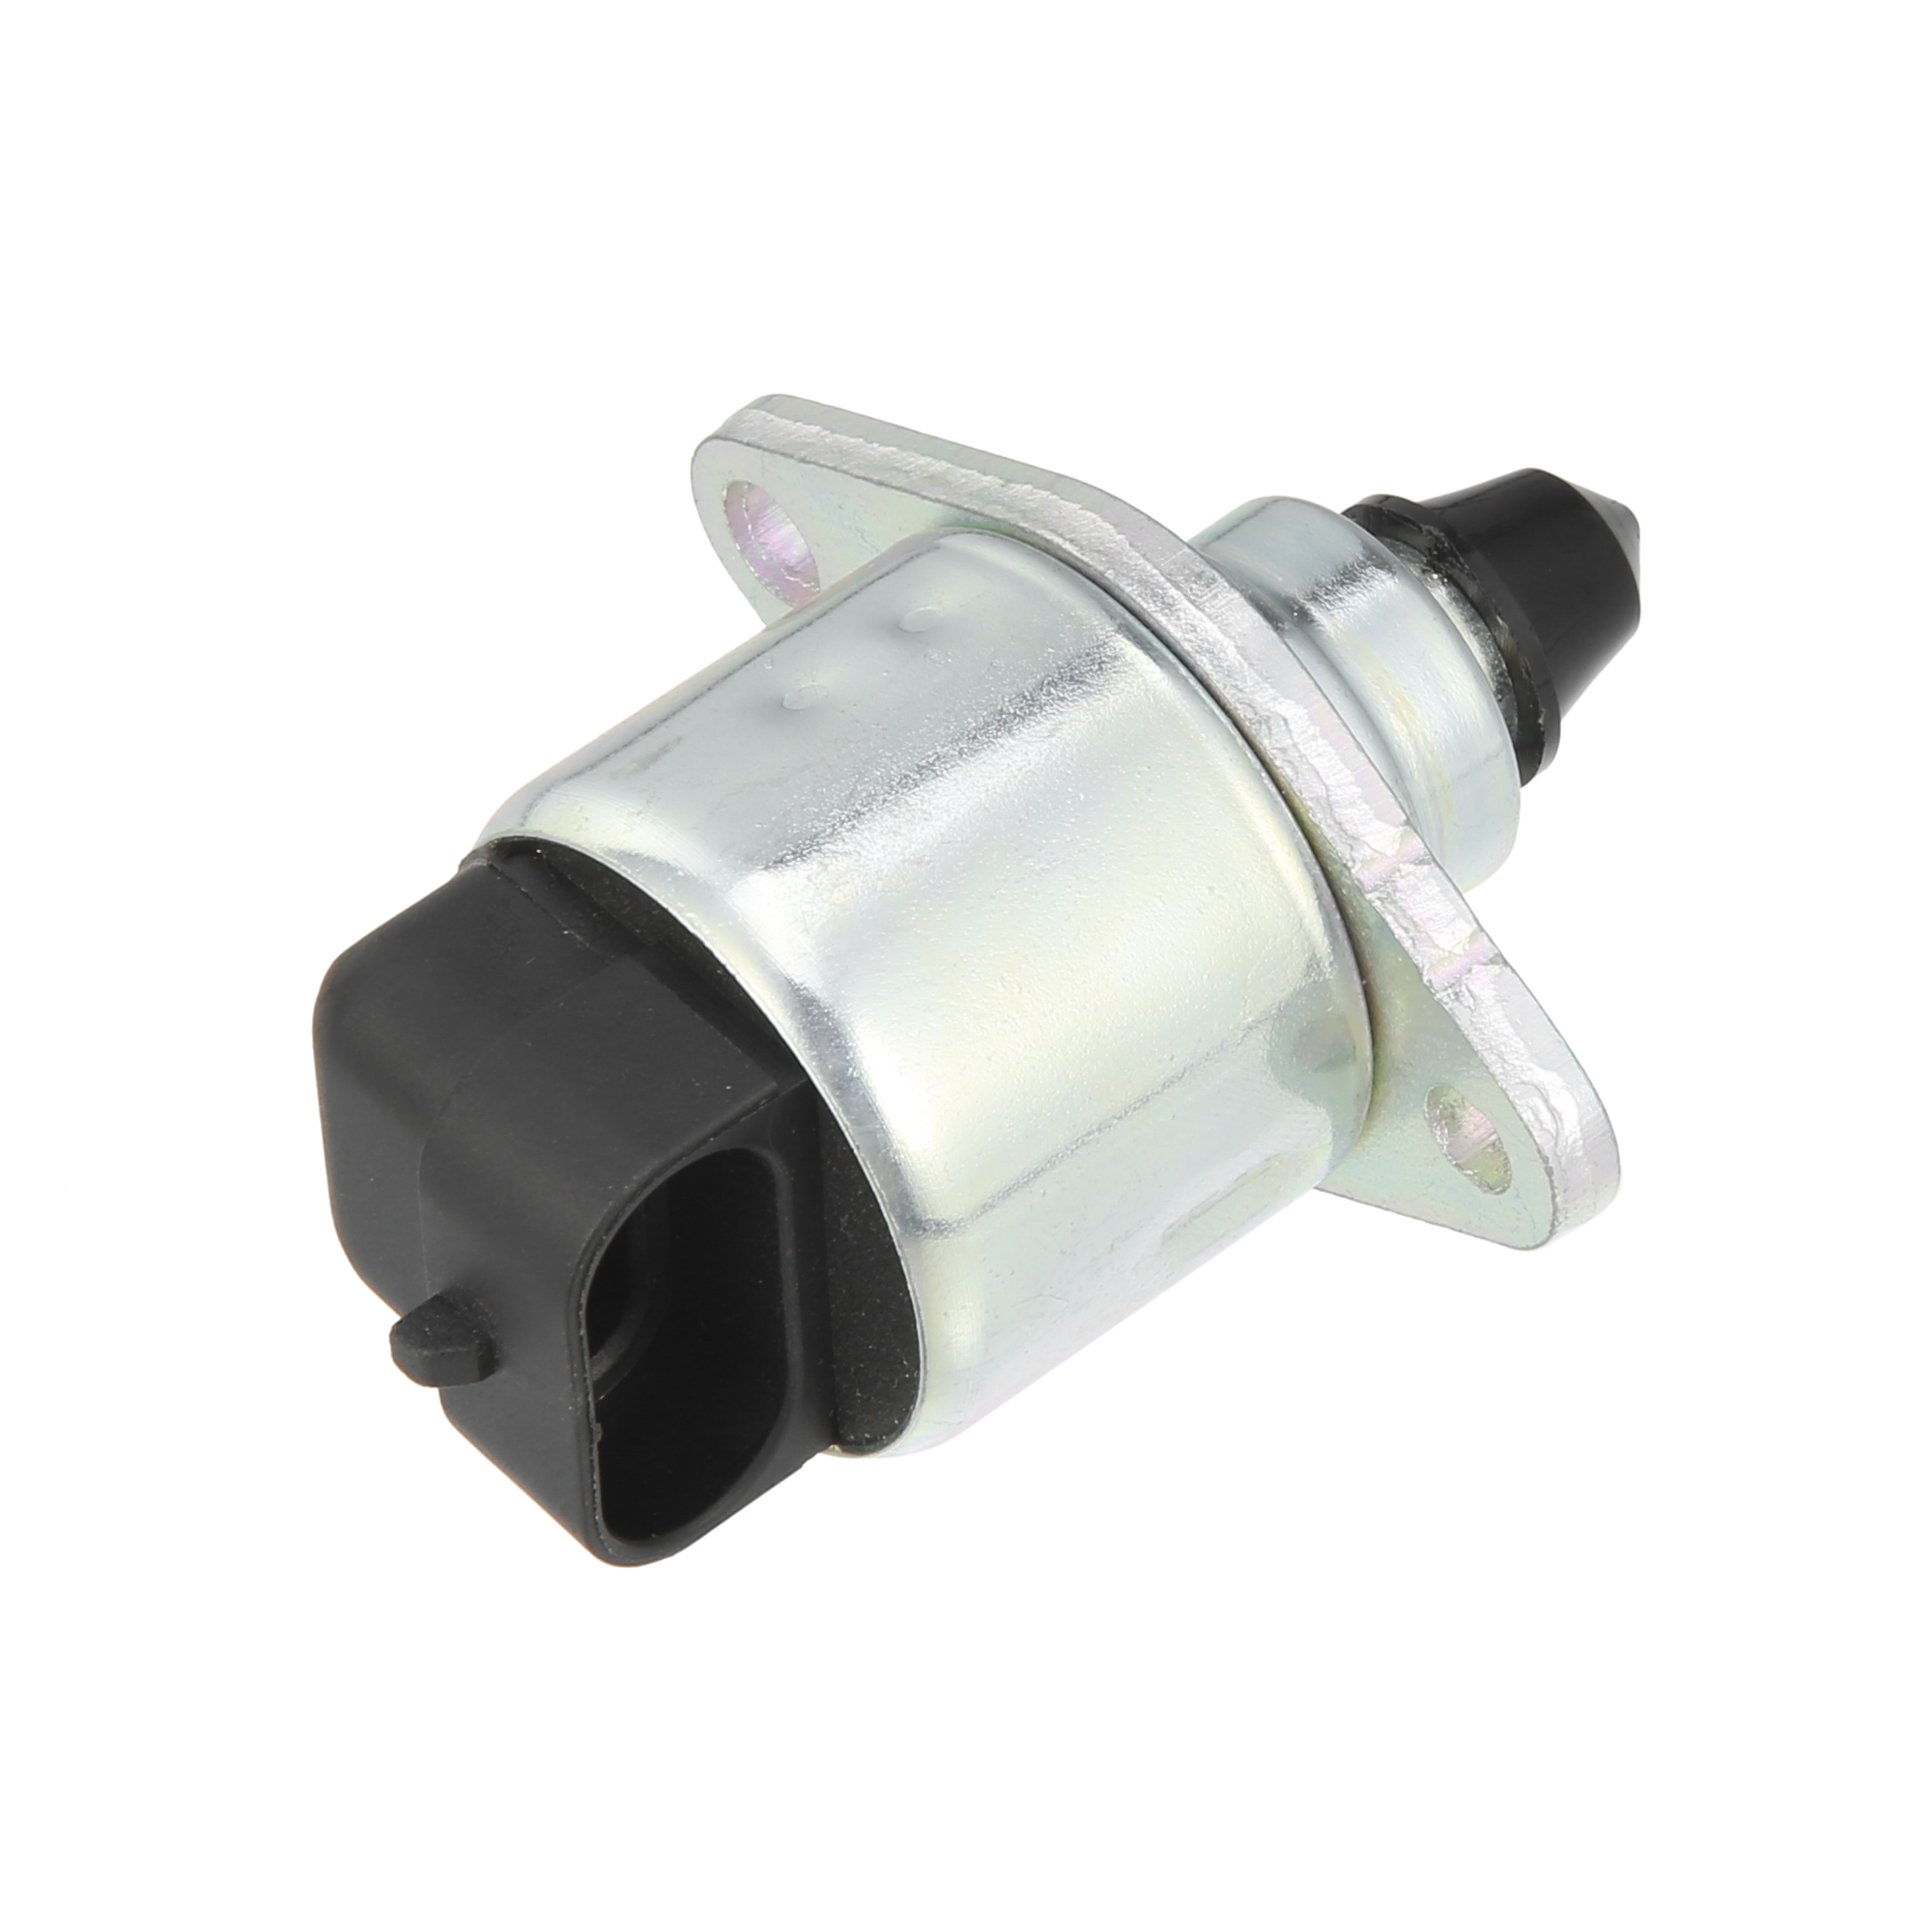 Car Idle Air Control Valve 96966721 96966710 96958412 with Gaskets for Chevy Spark M300 1.0L Silver Tone - image 4 of 6